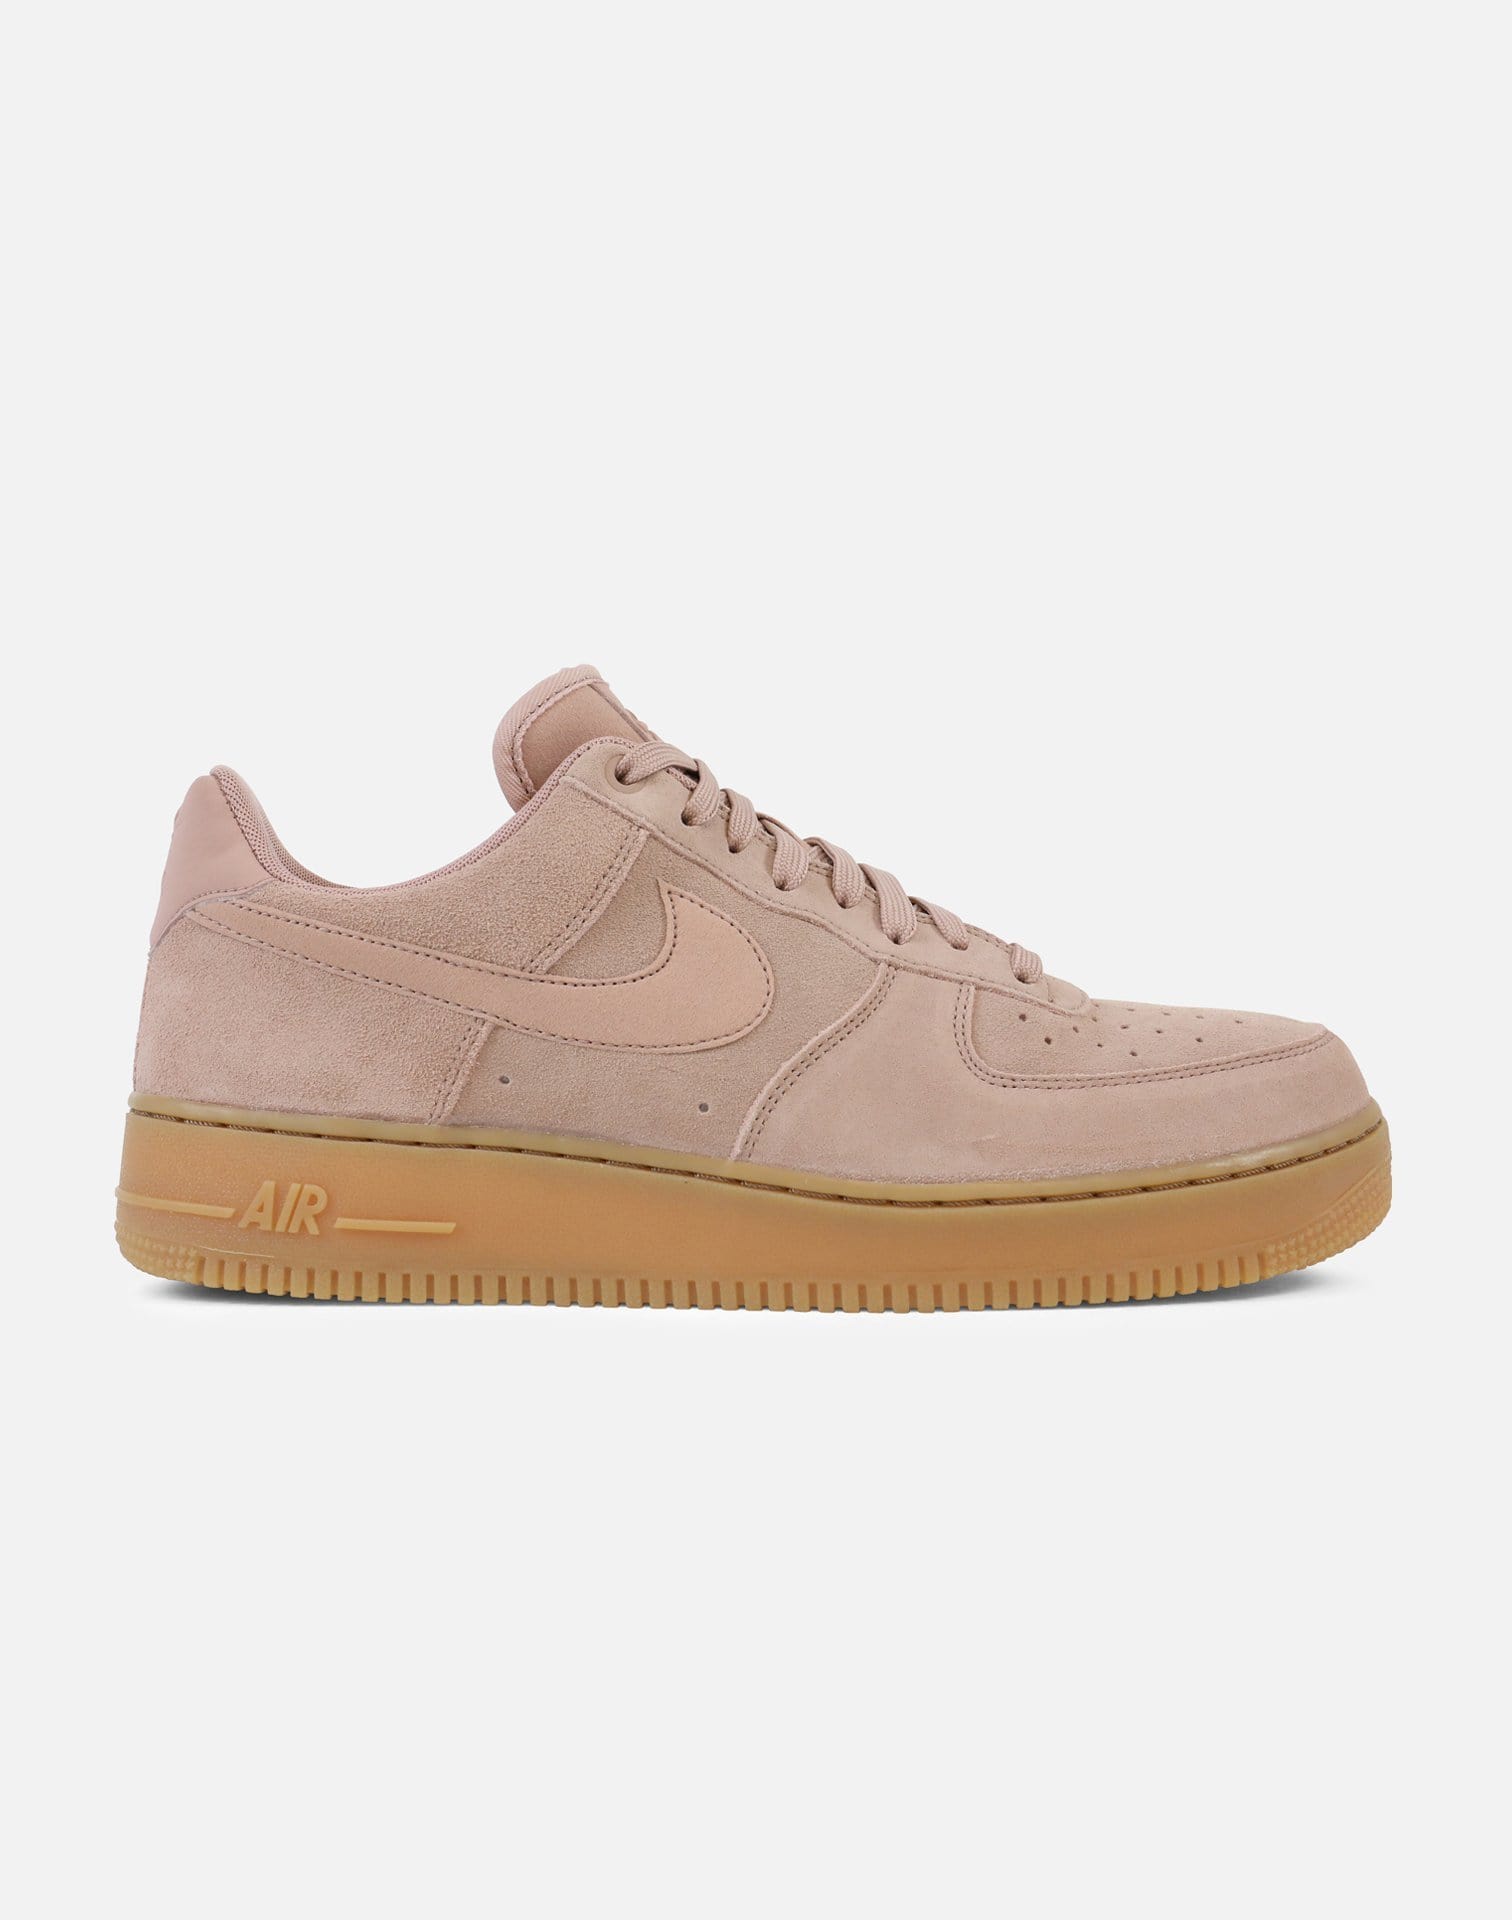 nike air force 1 light pink suede